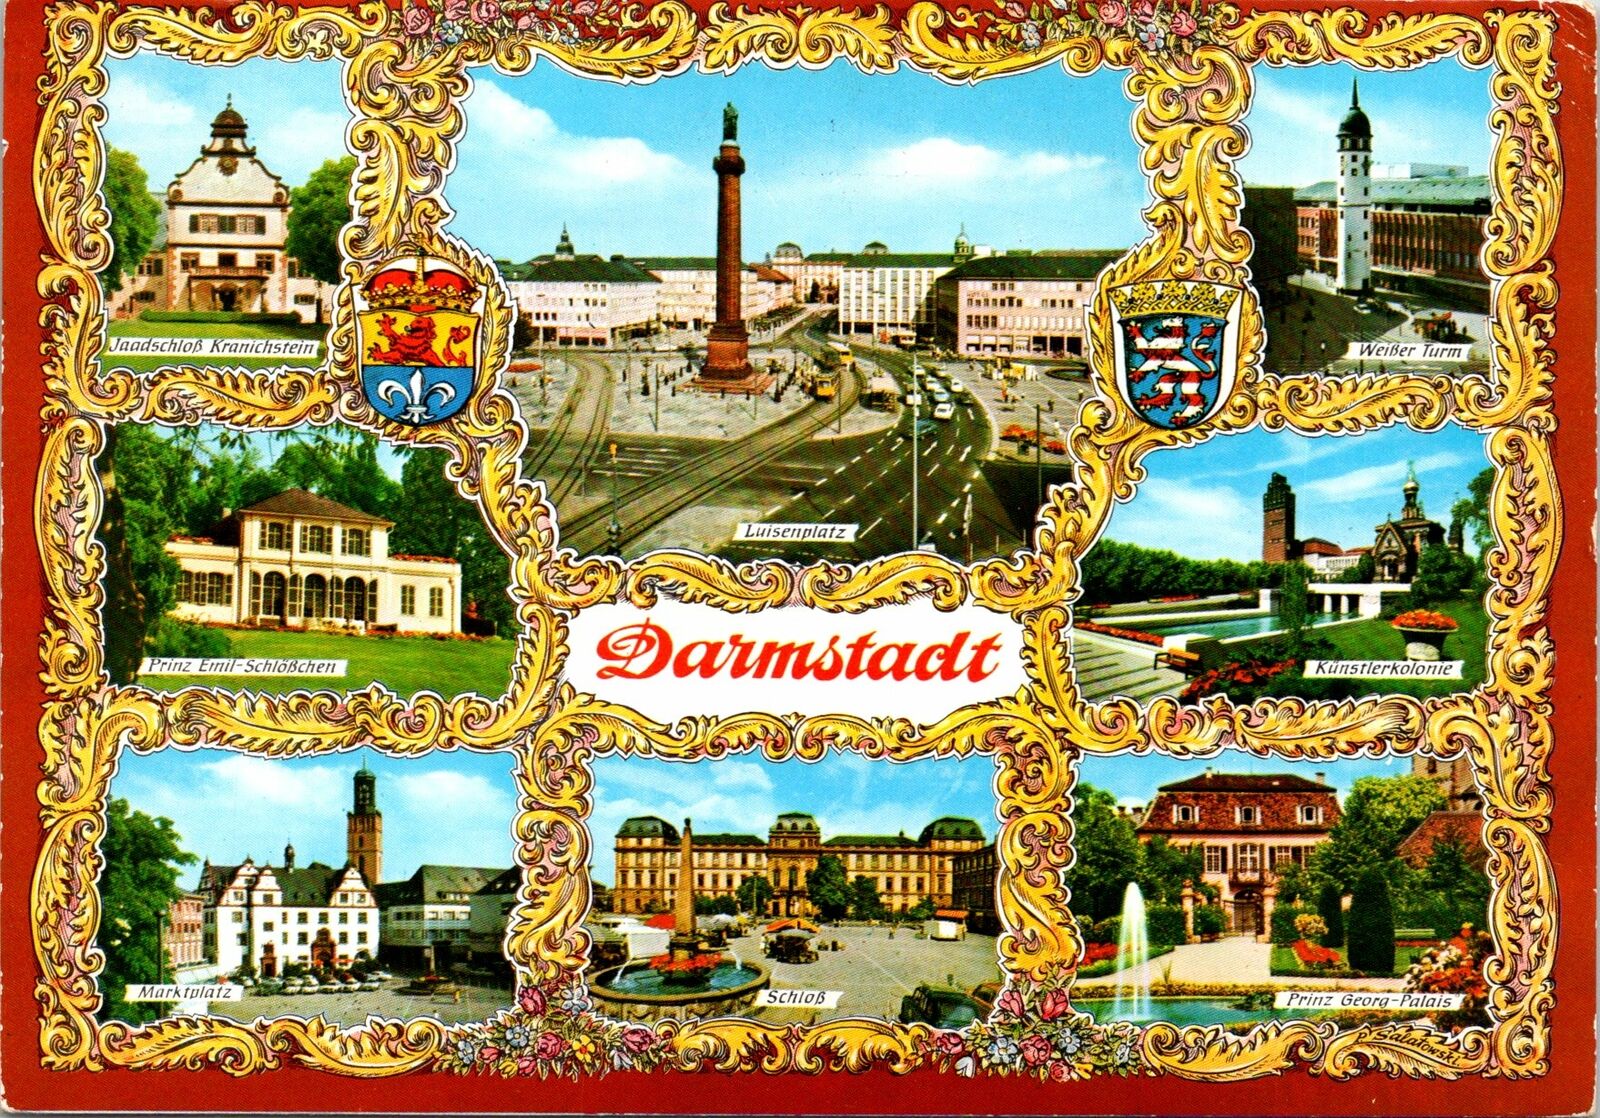 CONTINENTAL SIZE POSTCARD 8-PART MULTI-VIEW OF DARMSTADT GERMANY 1970s